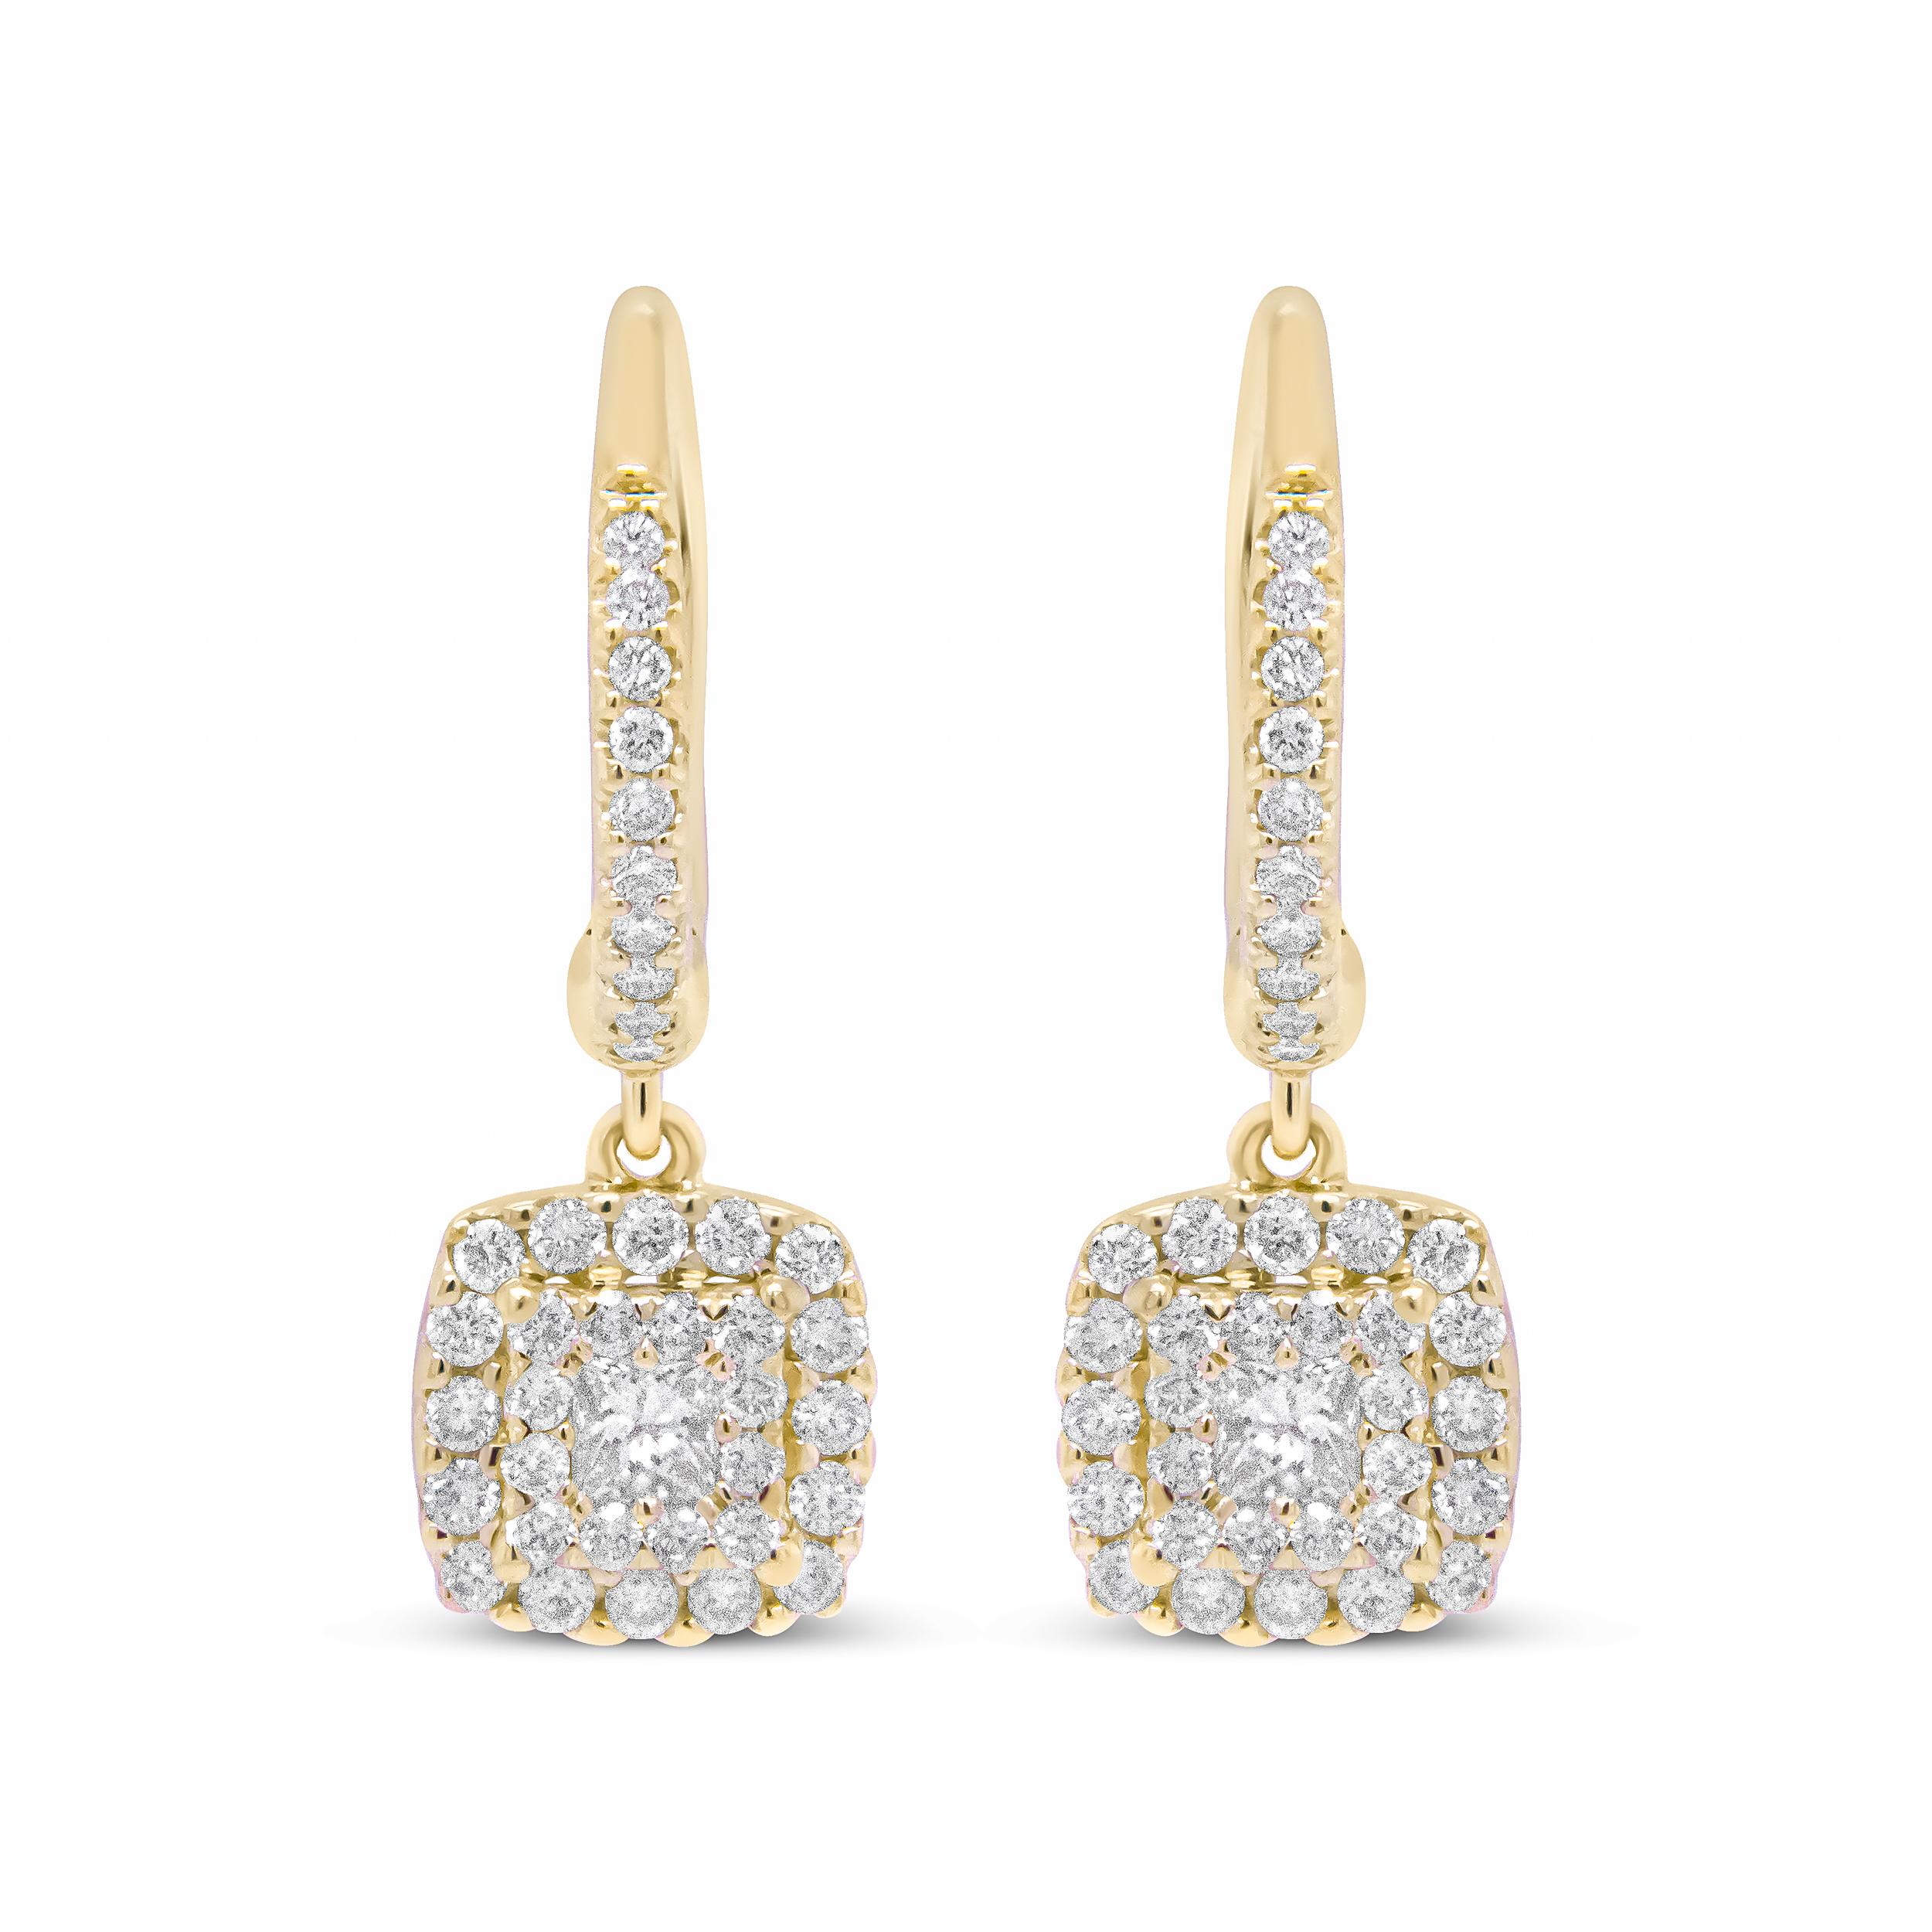 Layer on the sparkle wearing these supremely divine double halo dangle earrings made from genuine 14k yellow gold. At the center of each earring is a gleaming princess-cut diamond in an invisible setting that perfectly showcases this sparkling white